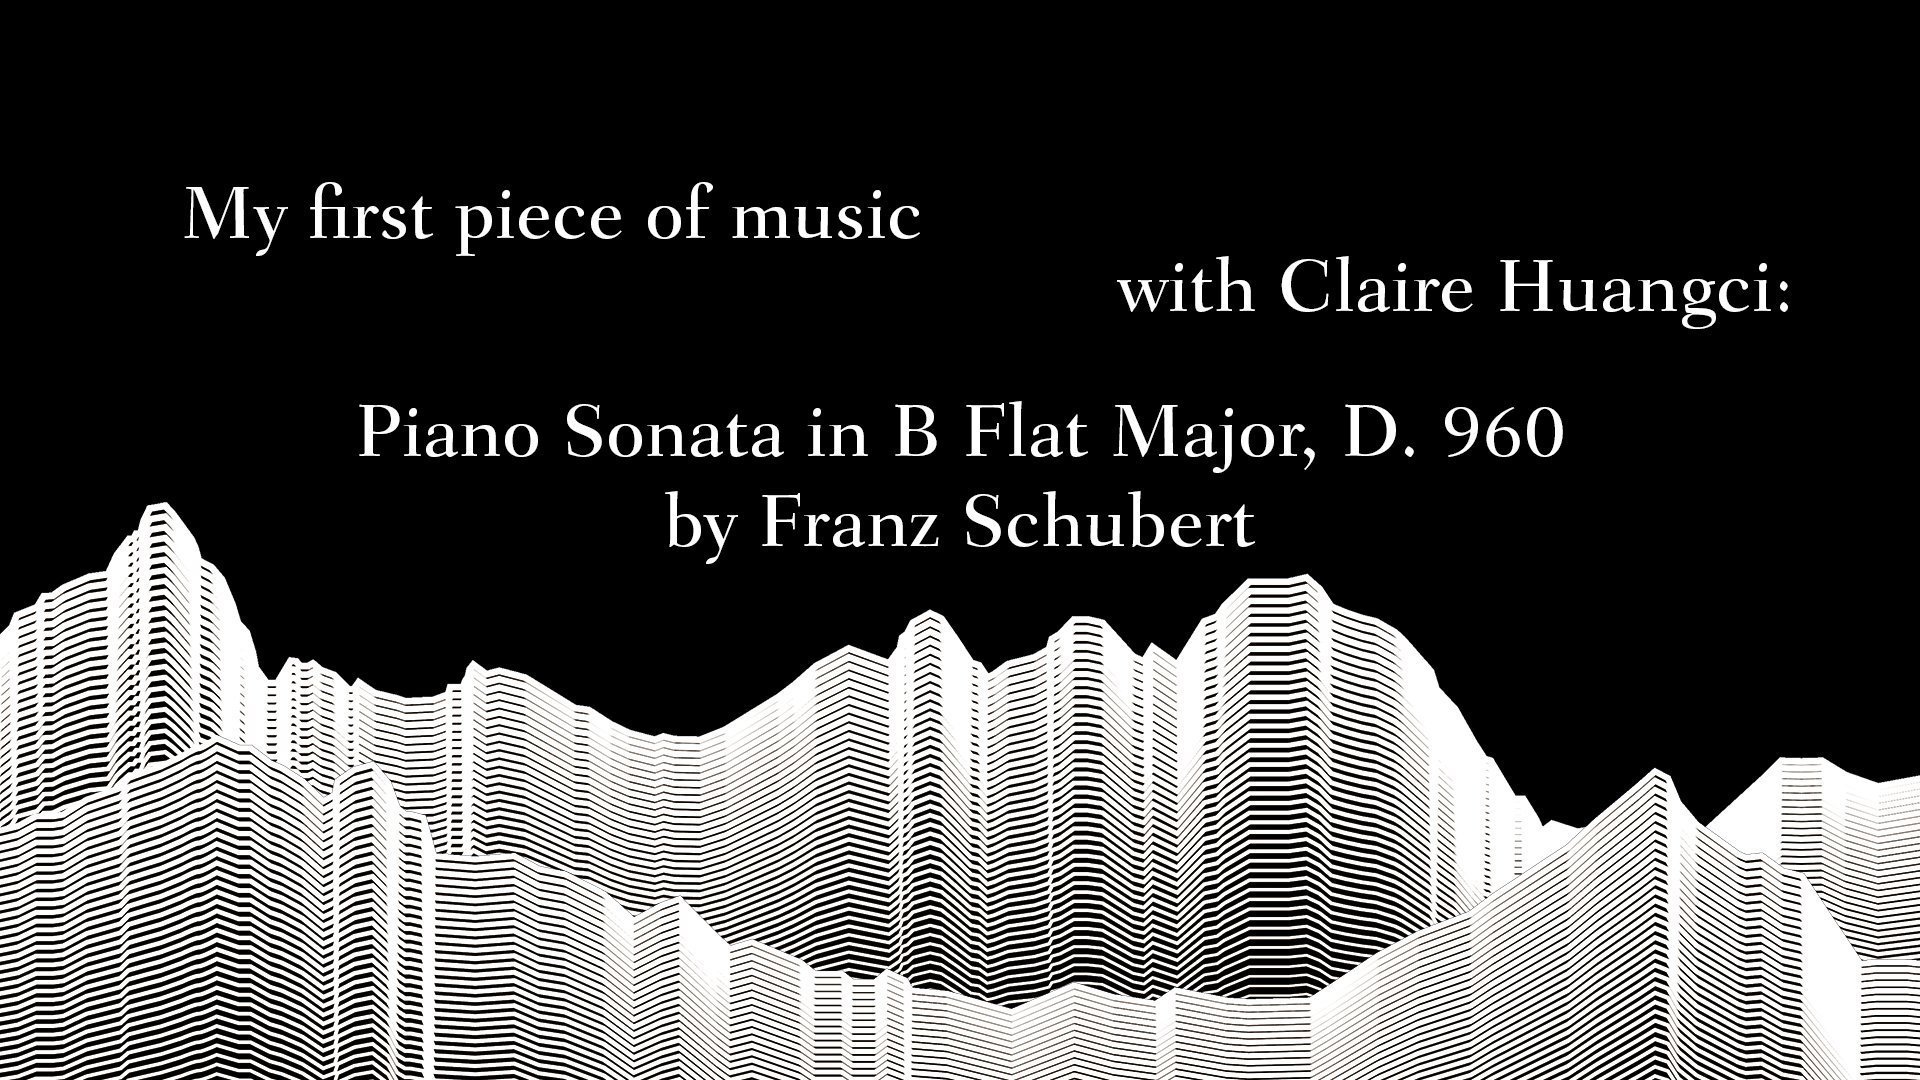 My first piece of music with Claire Huangci